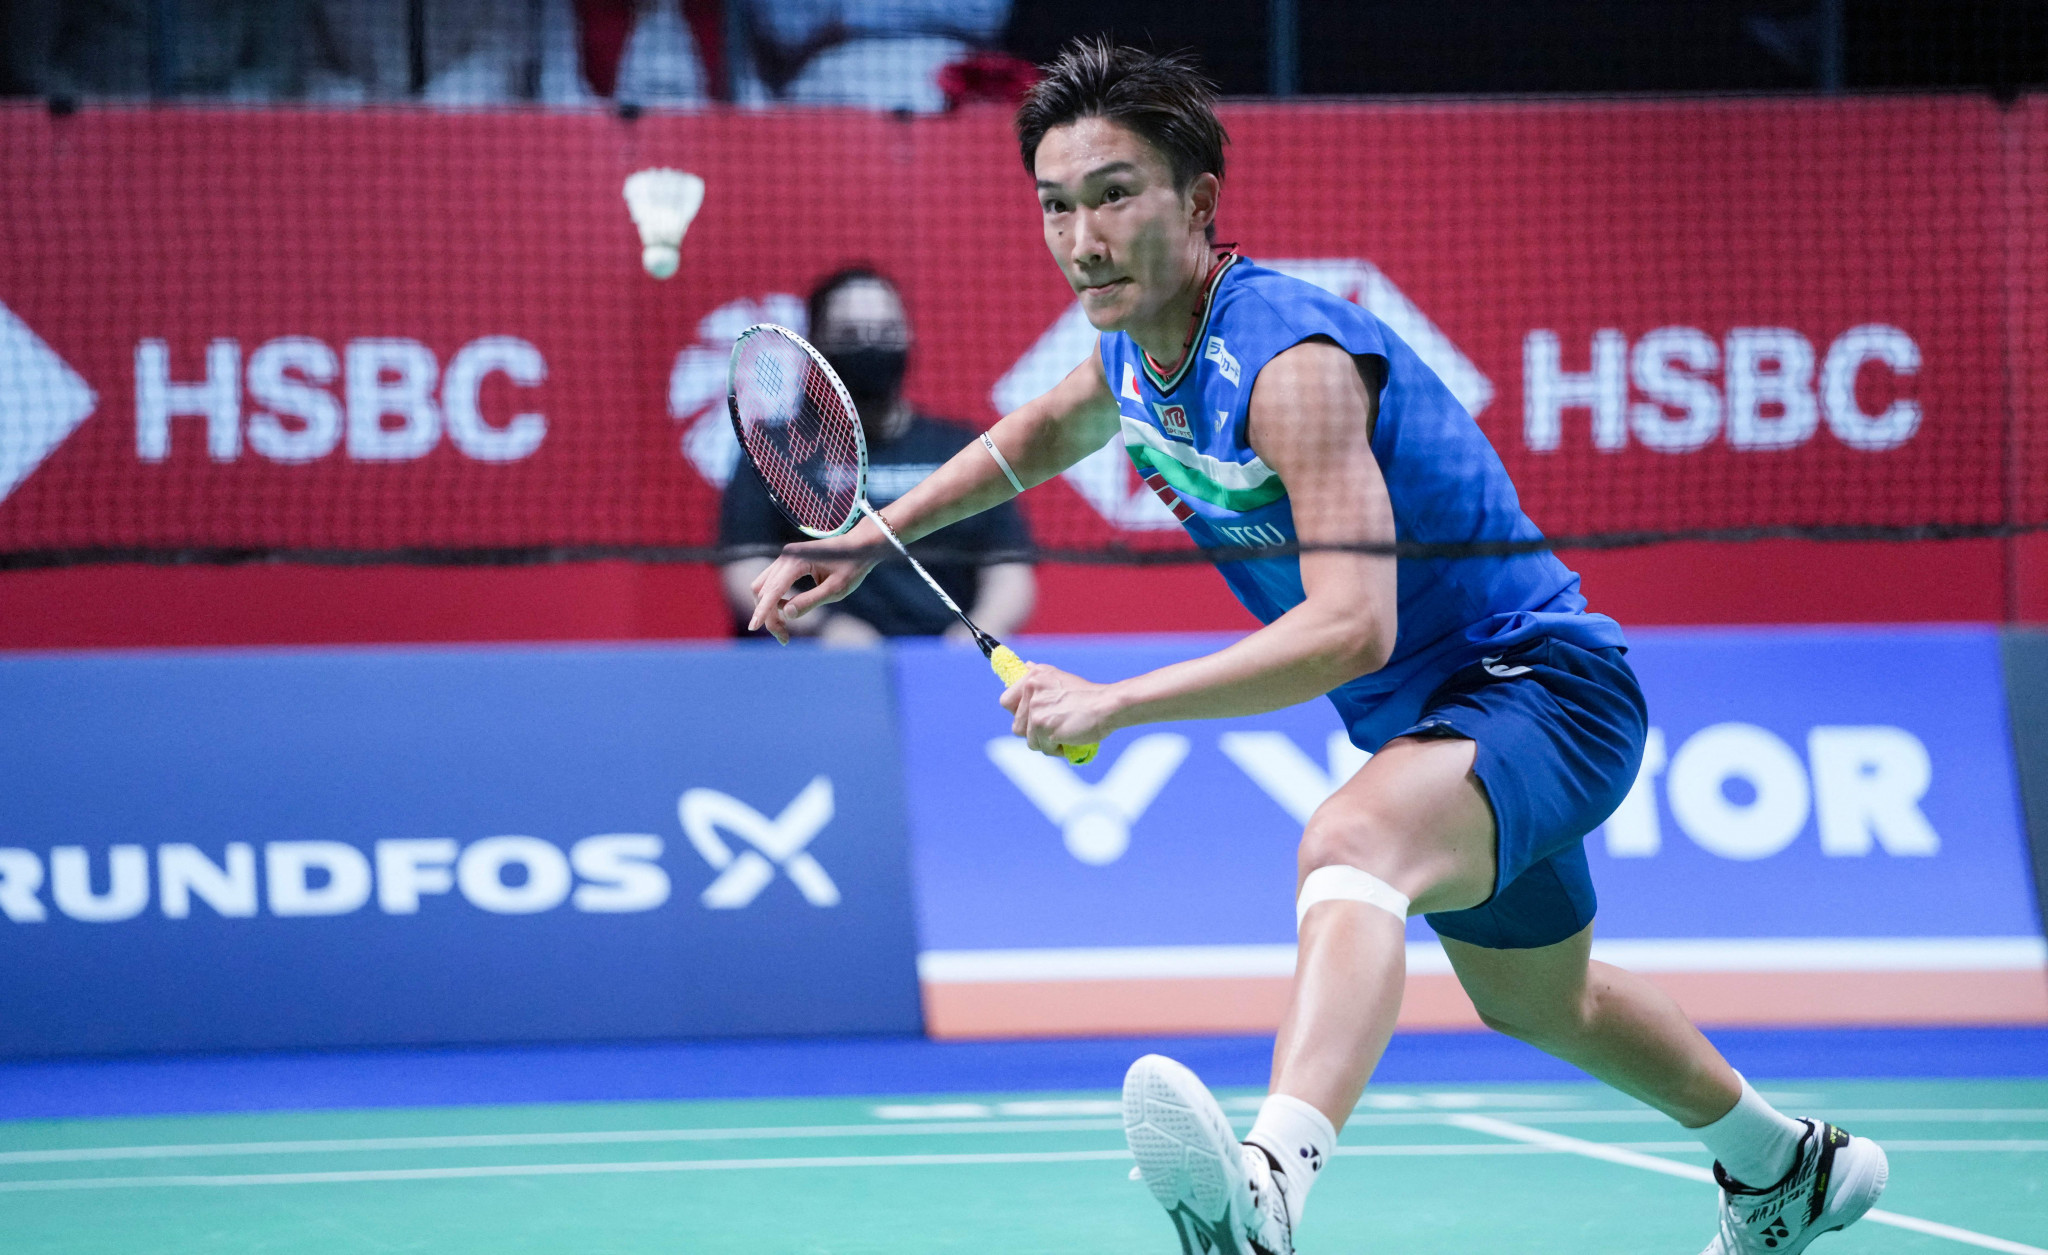 Japan's Kenta Momota retired injured after two points of his men's singles match at the BWF World Tour Finals in Bali ©Getty Images